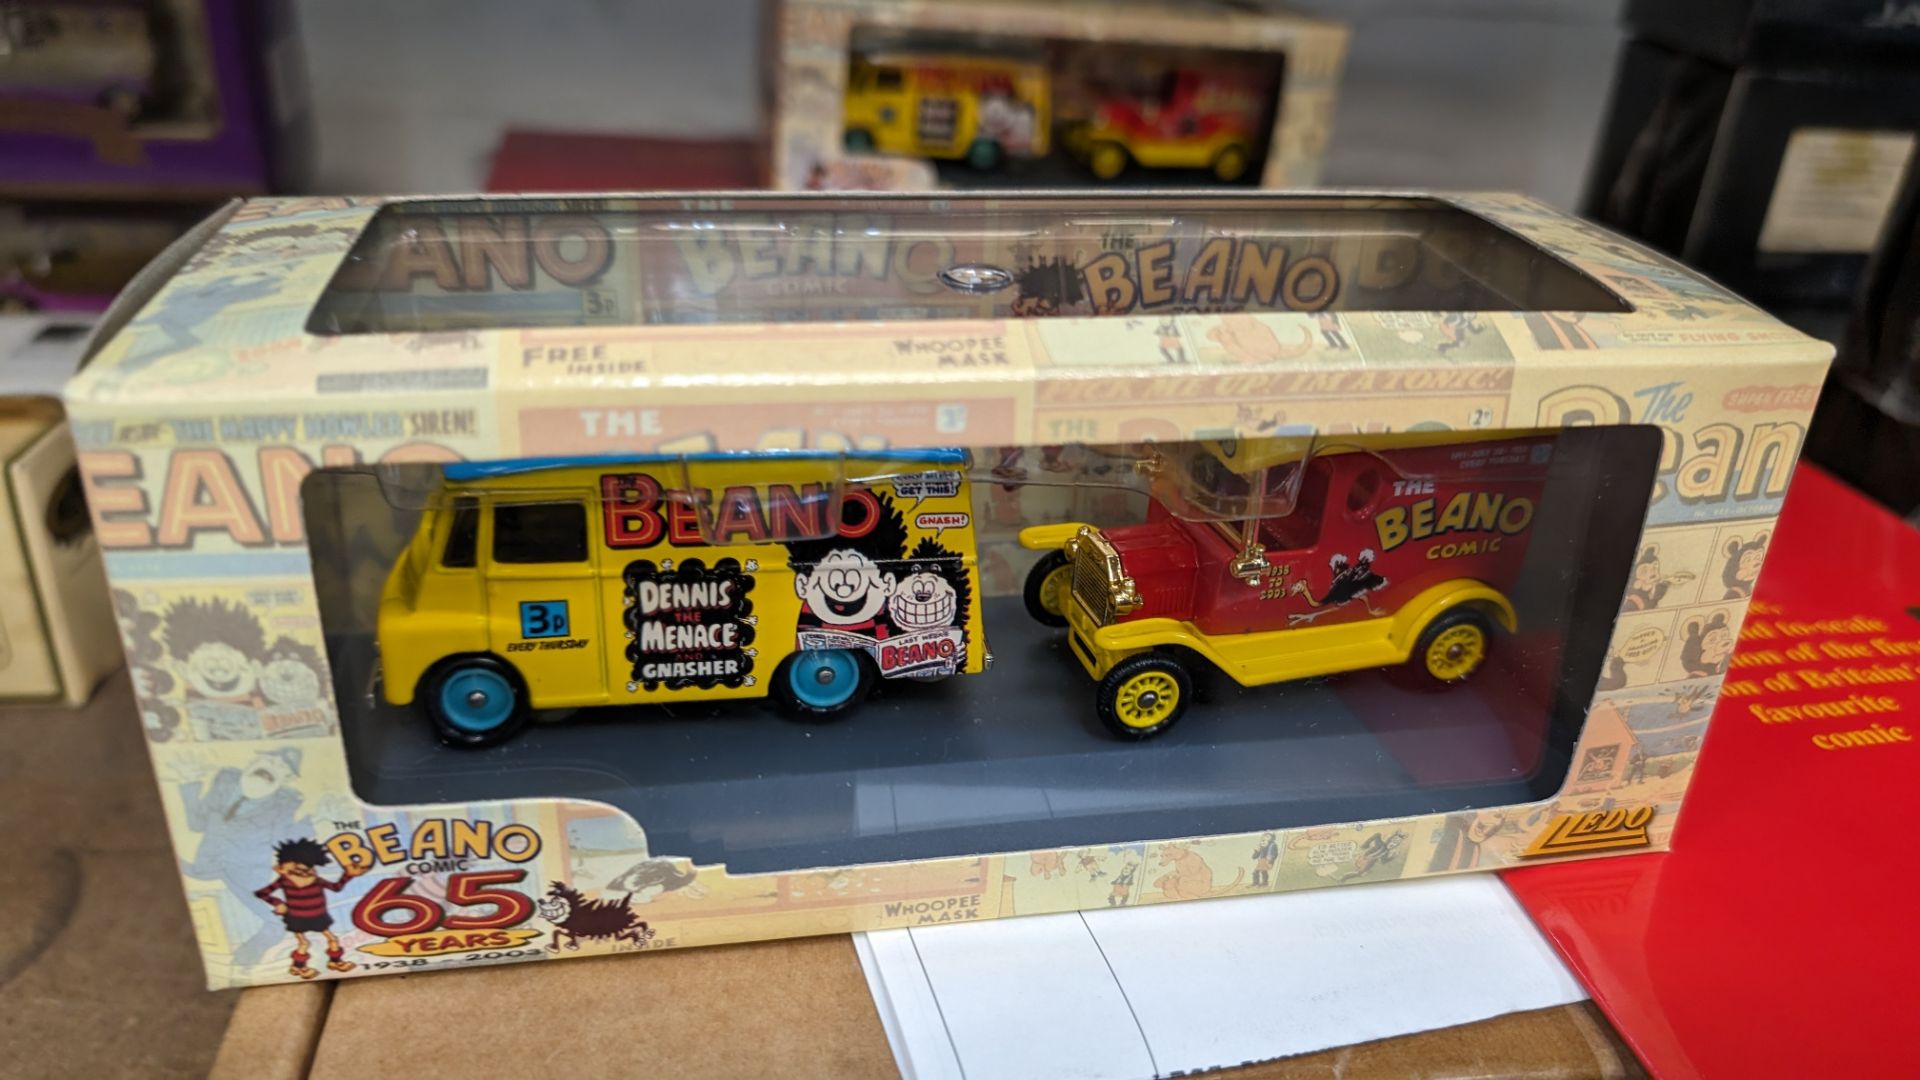 Beano 65th anniversary gift set including reproduction of the first edition of the comic plus 2 mode - Image 3 of 9